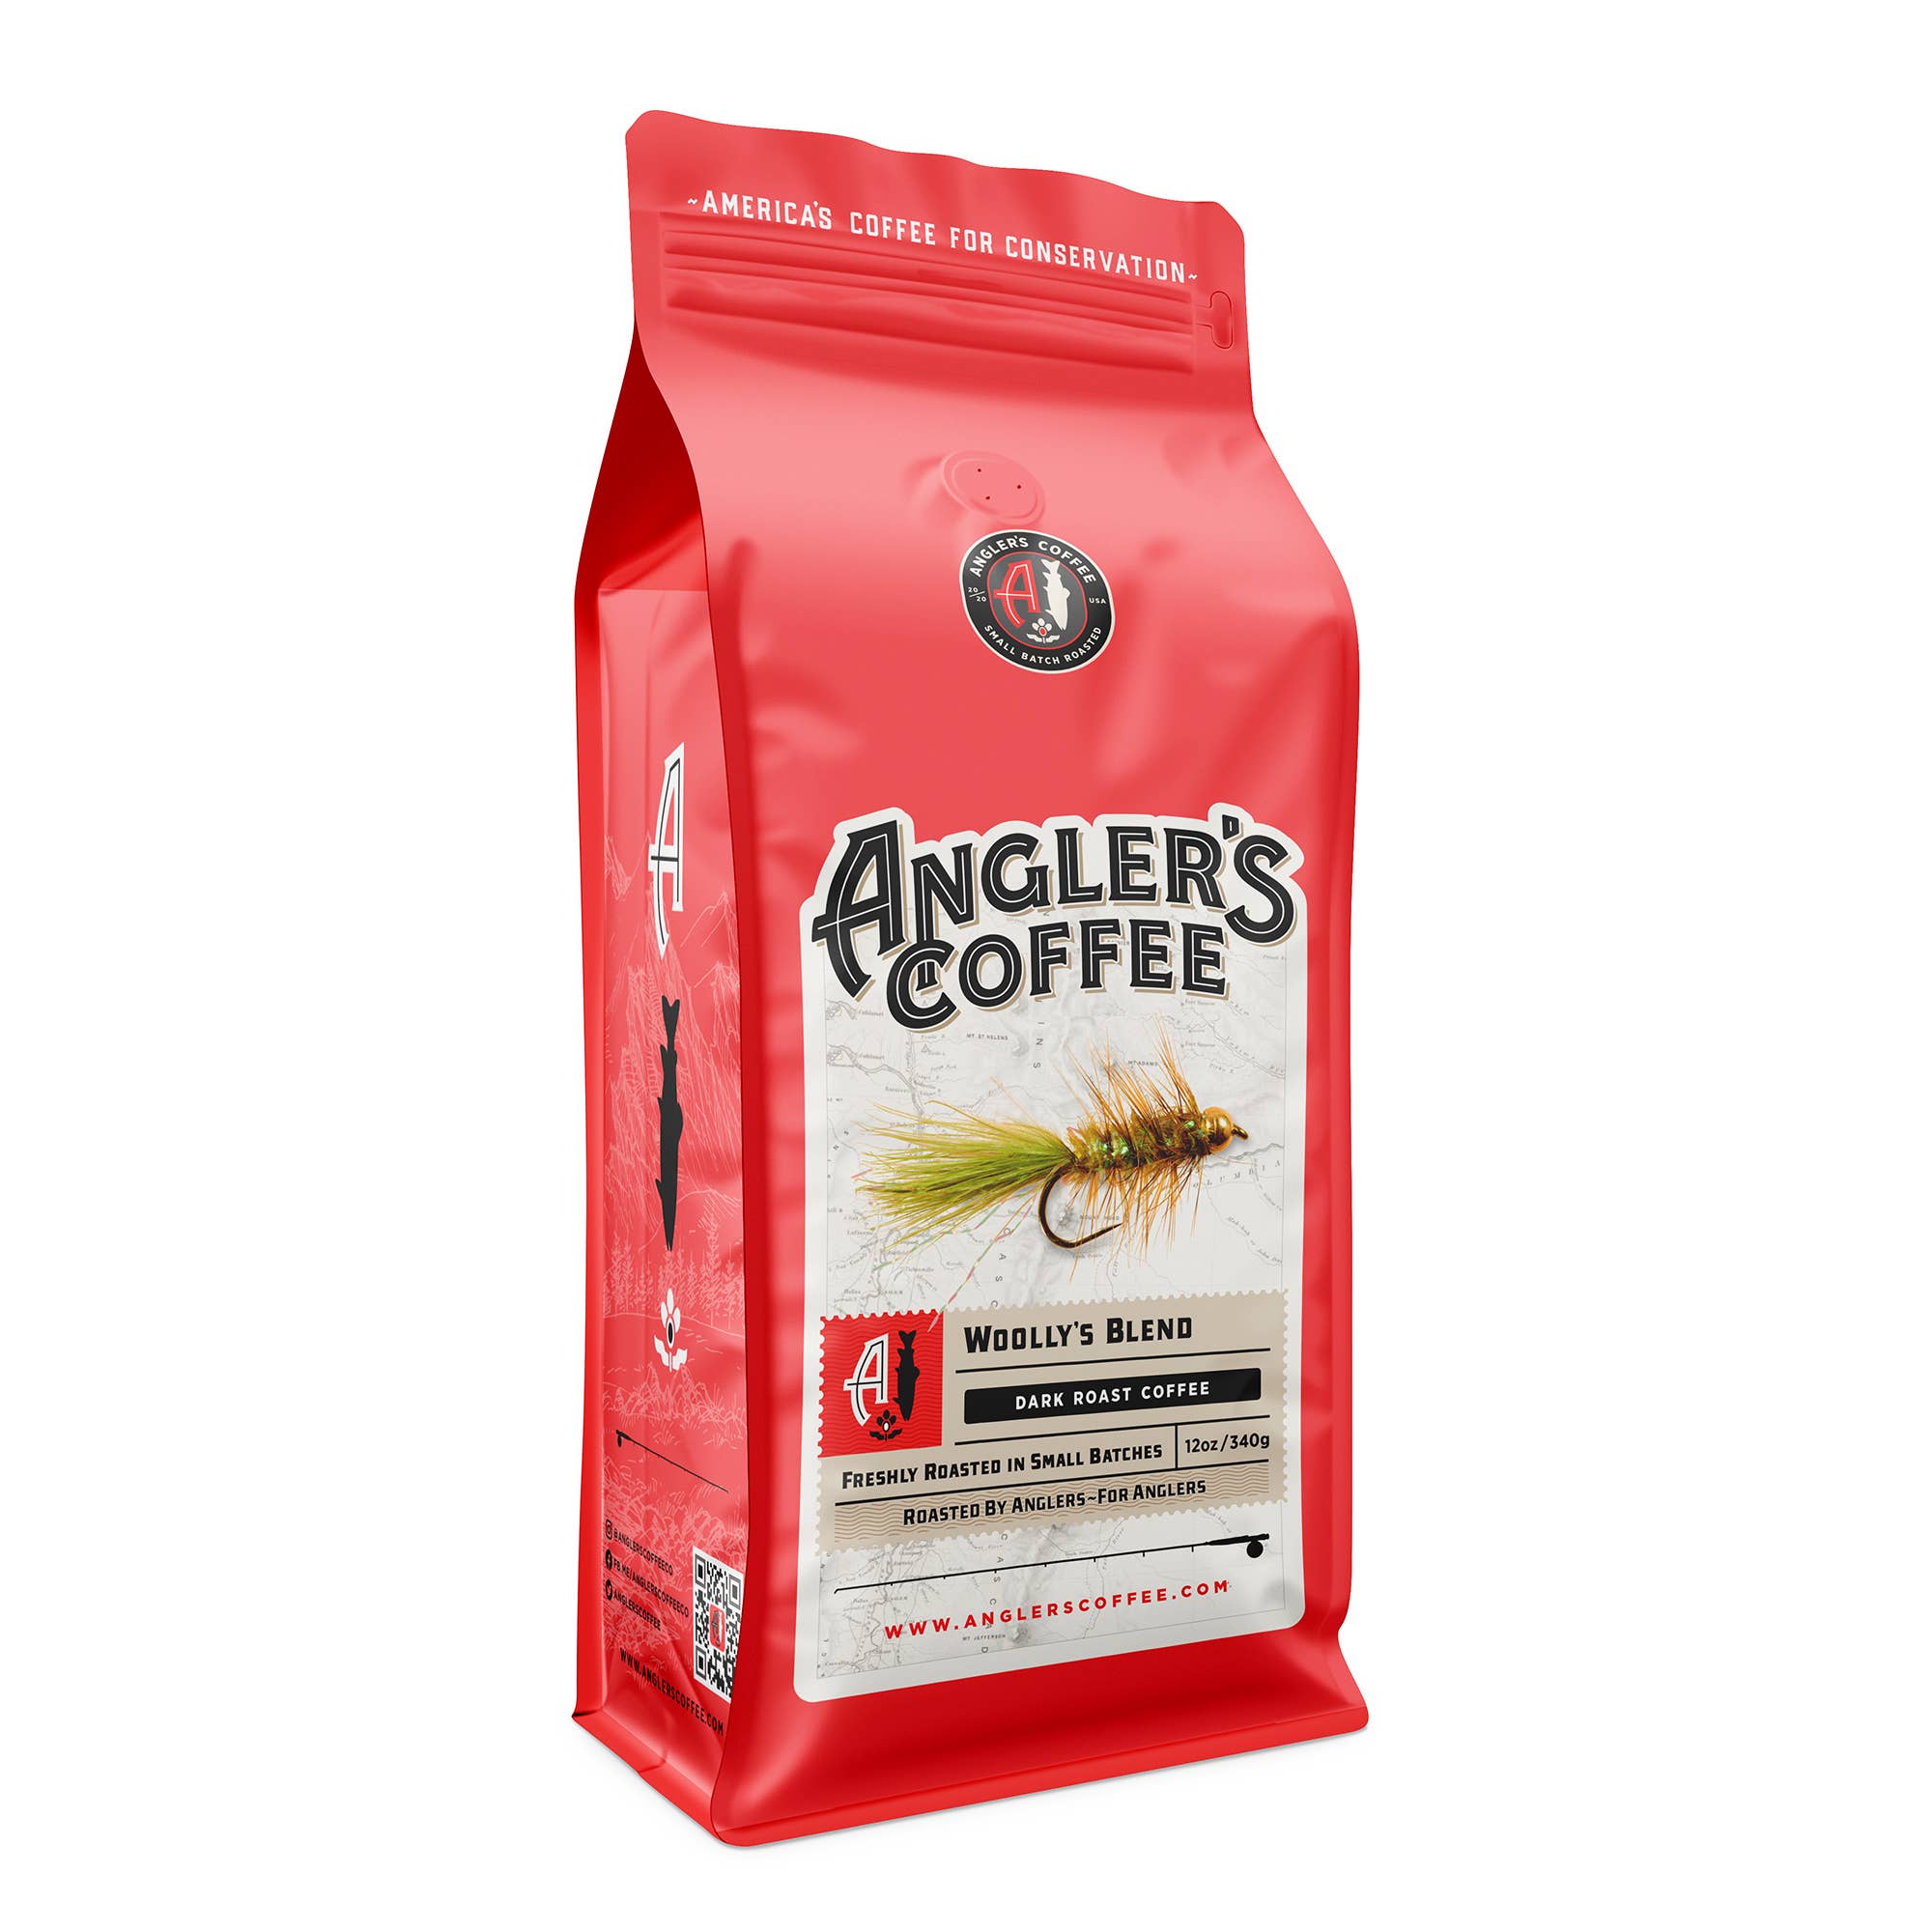 Angler's Coffee - Woolly's Blend - Single Unit: Drip Grind / 12oz - Pacific Flyway Supplies